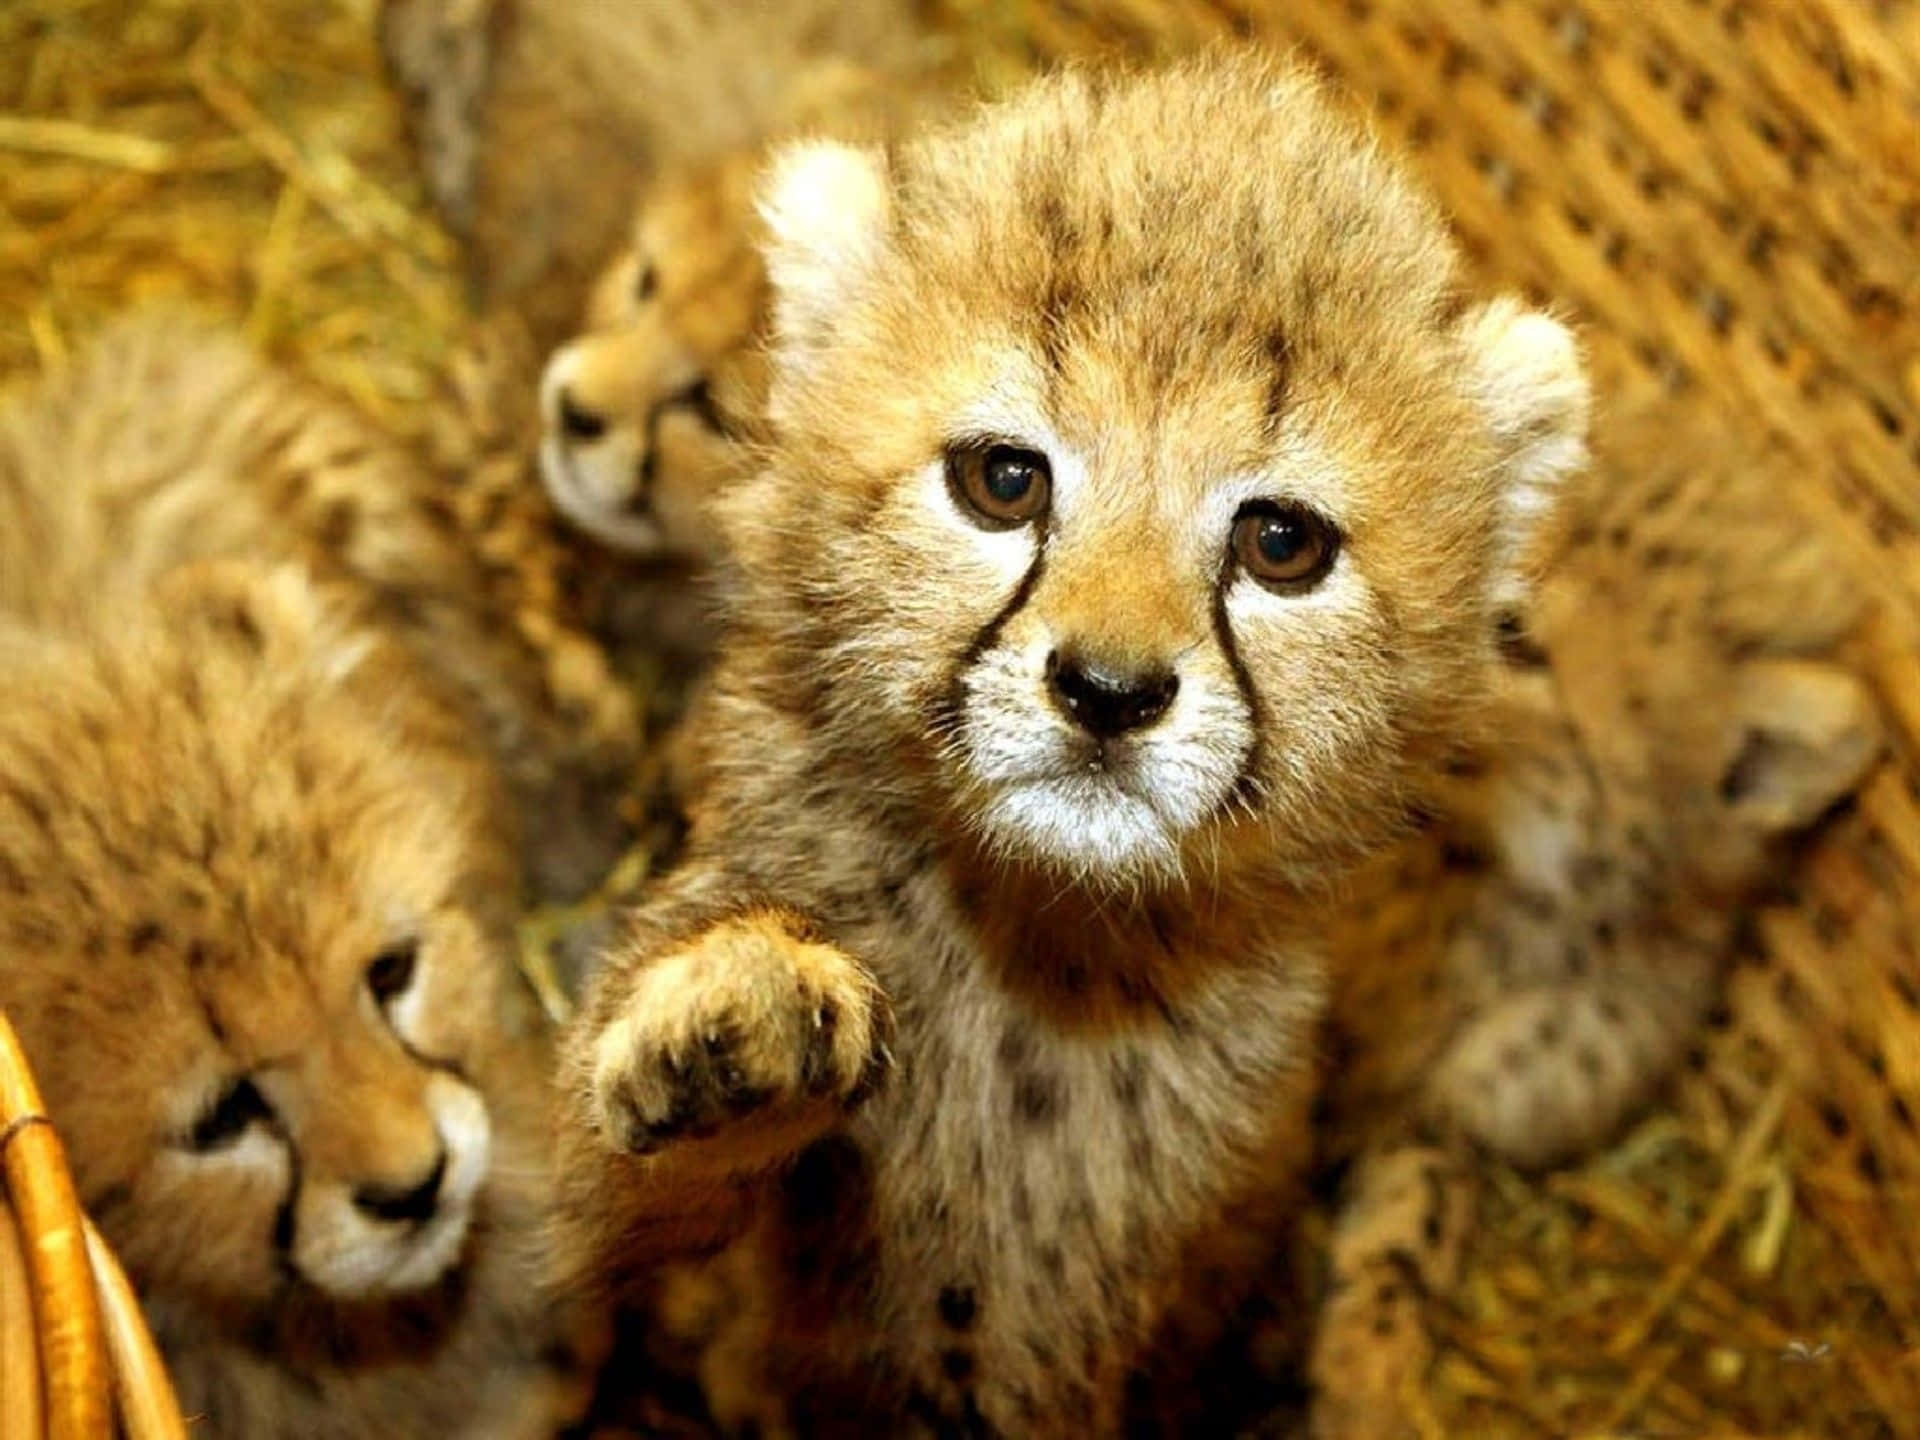 Aww! Look at this shy, adorable baby animal. They're making the cutest face!